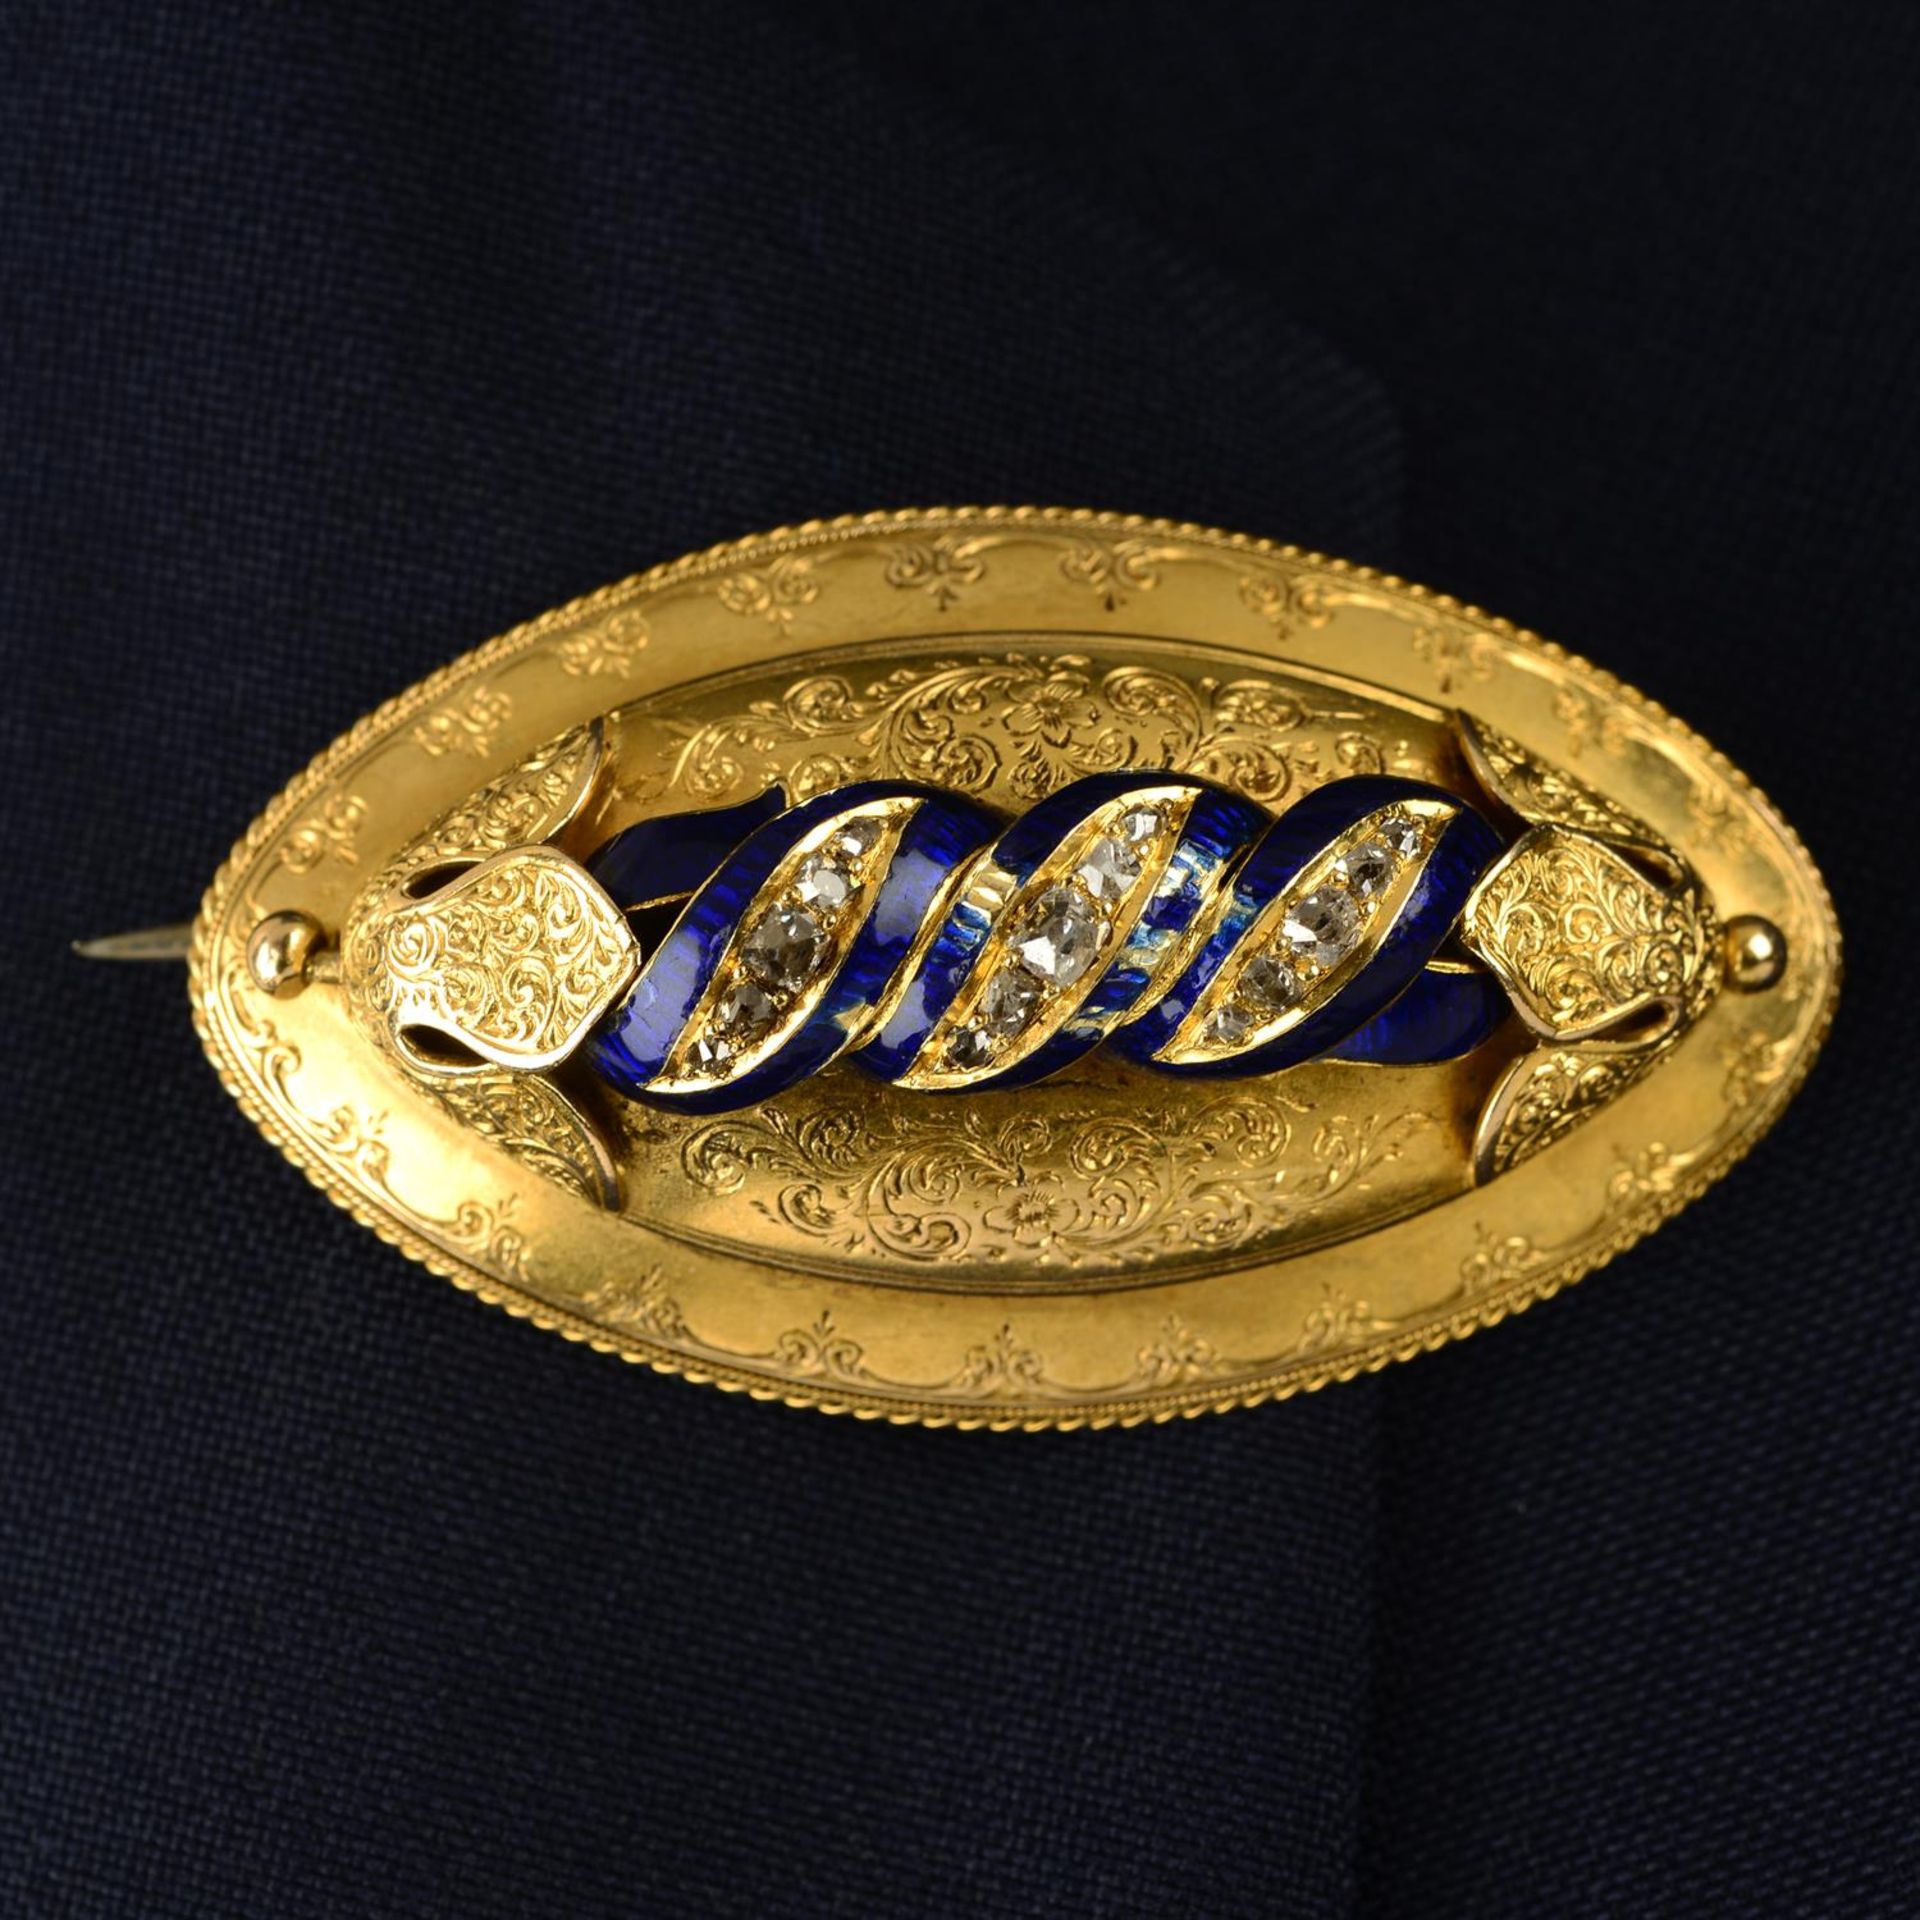 A mid to late 19th century engraved gold, old-cut diamond and blue enamel brooch.